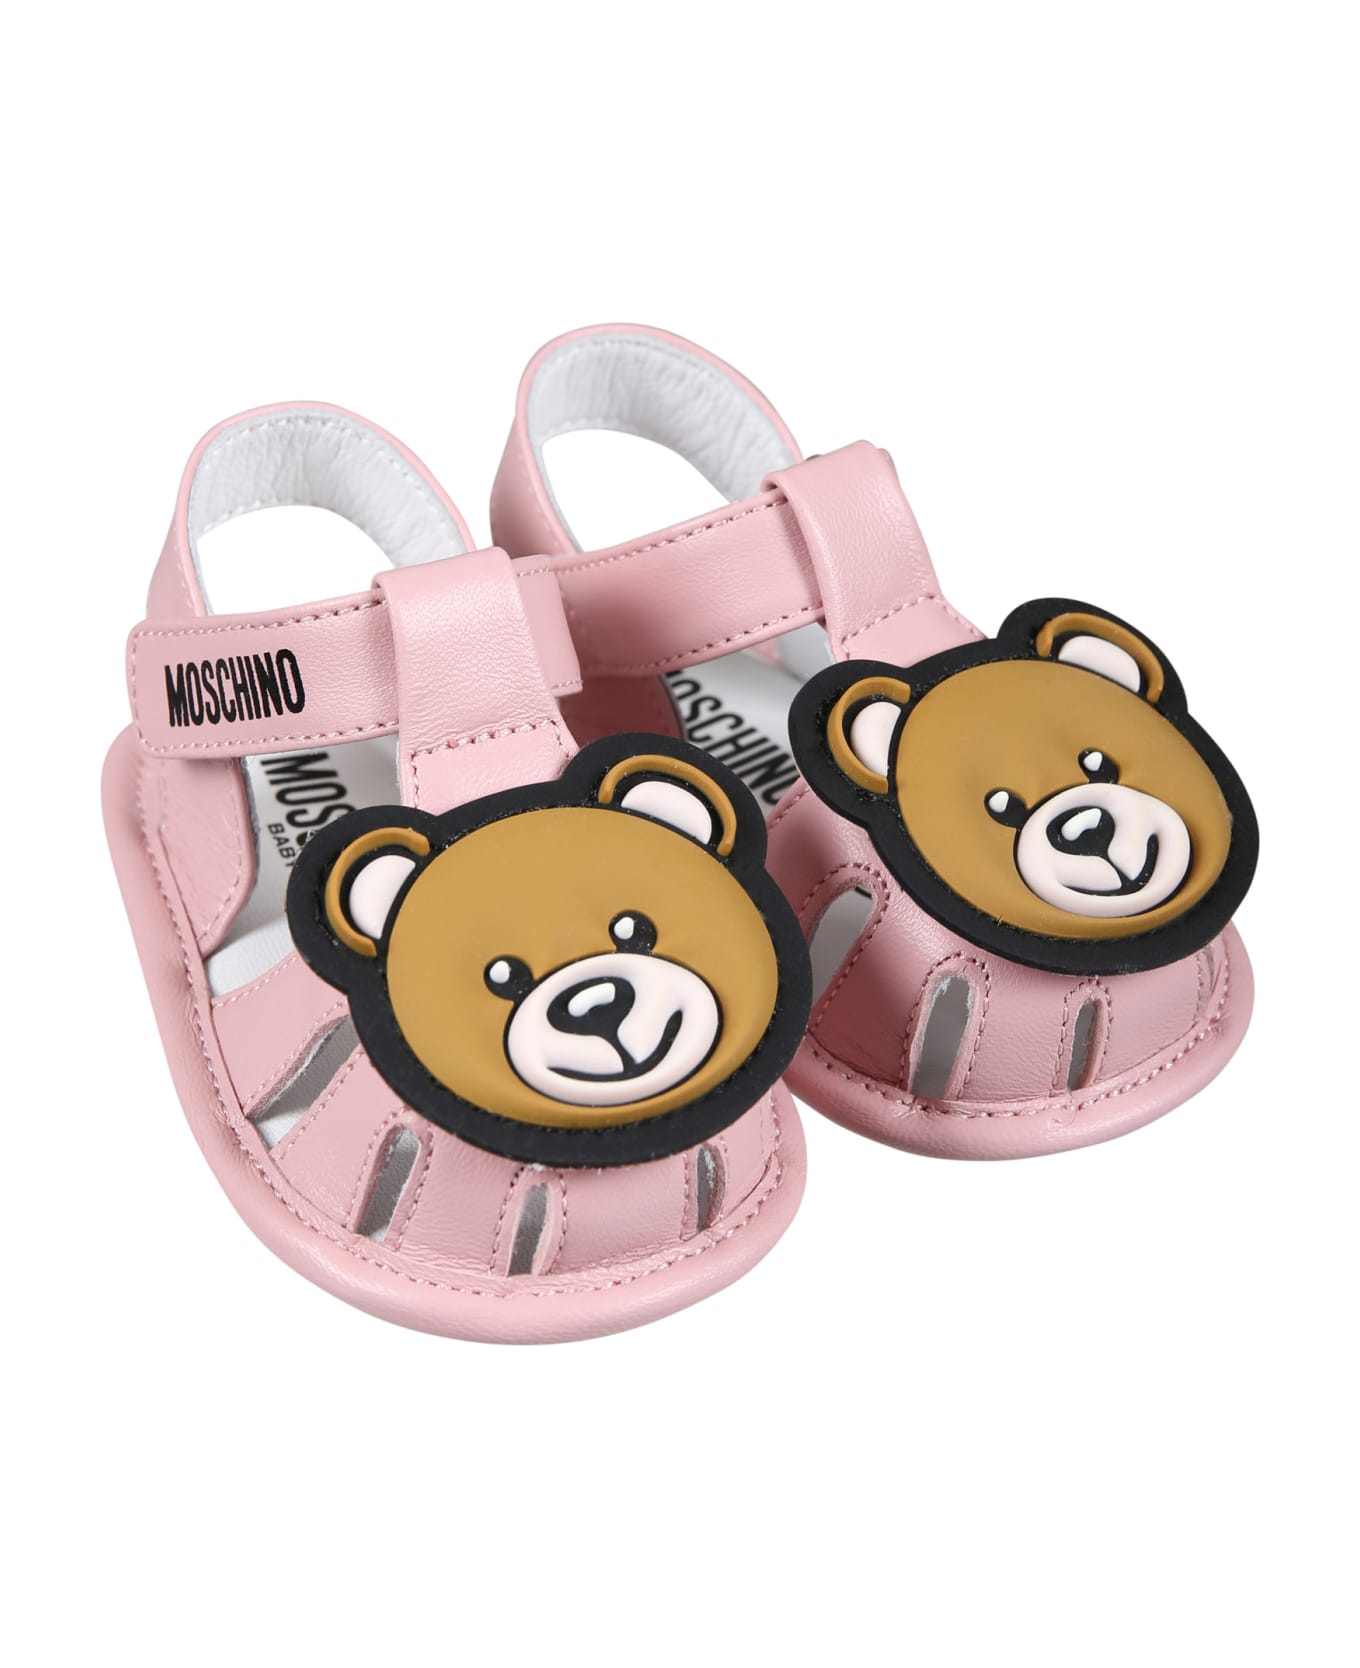 Moschino Pink Sandals For Baby Girl With Teddy Bear - Pink